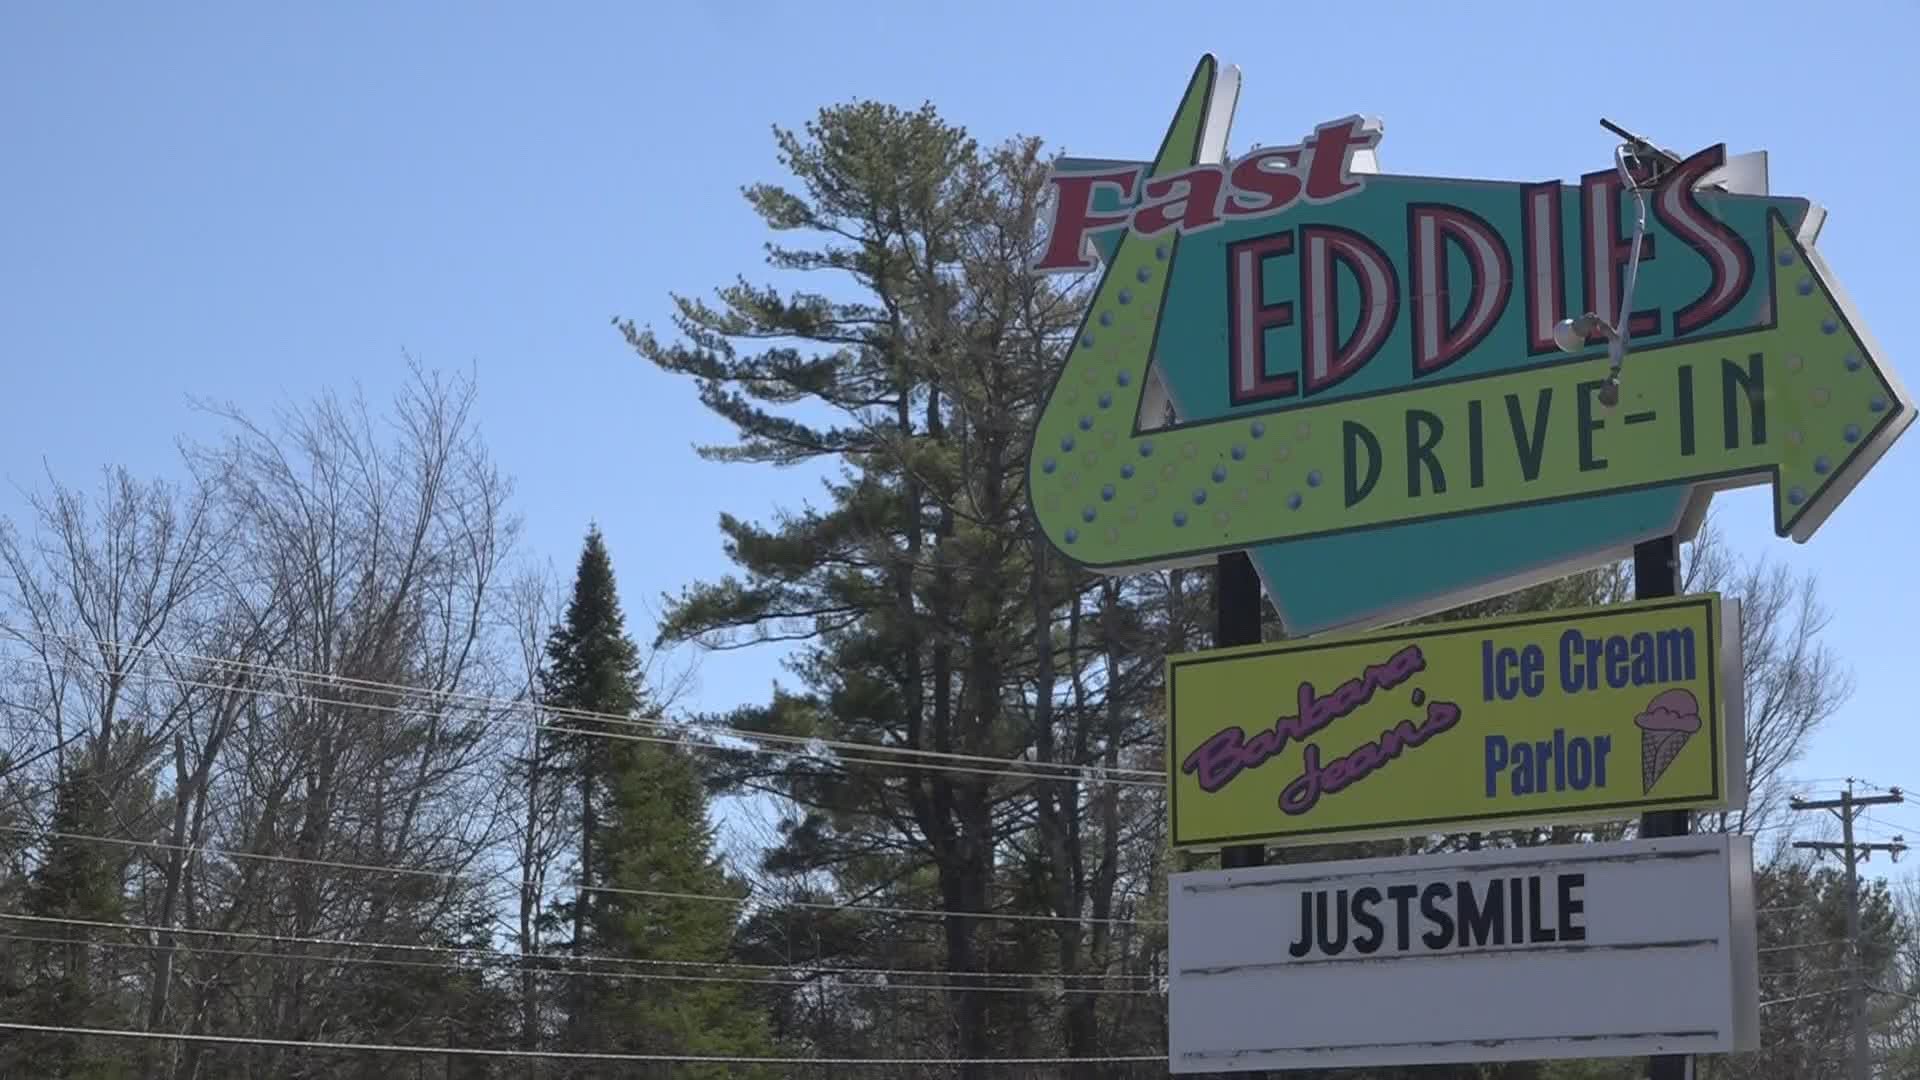 Fast Eddie's Drive-In opening early due to coronavirus, COVID-19 pandemic